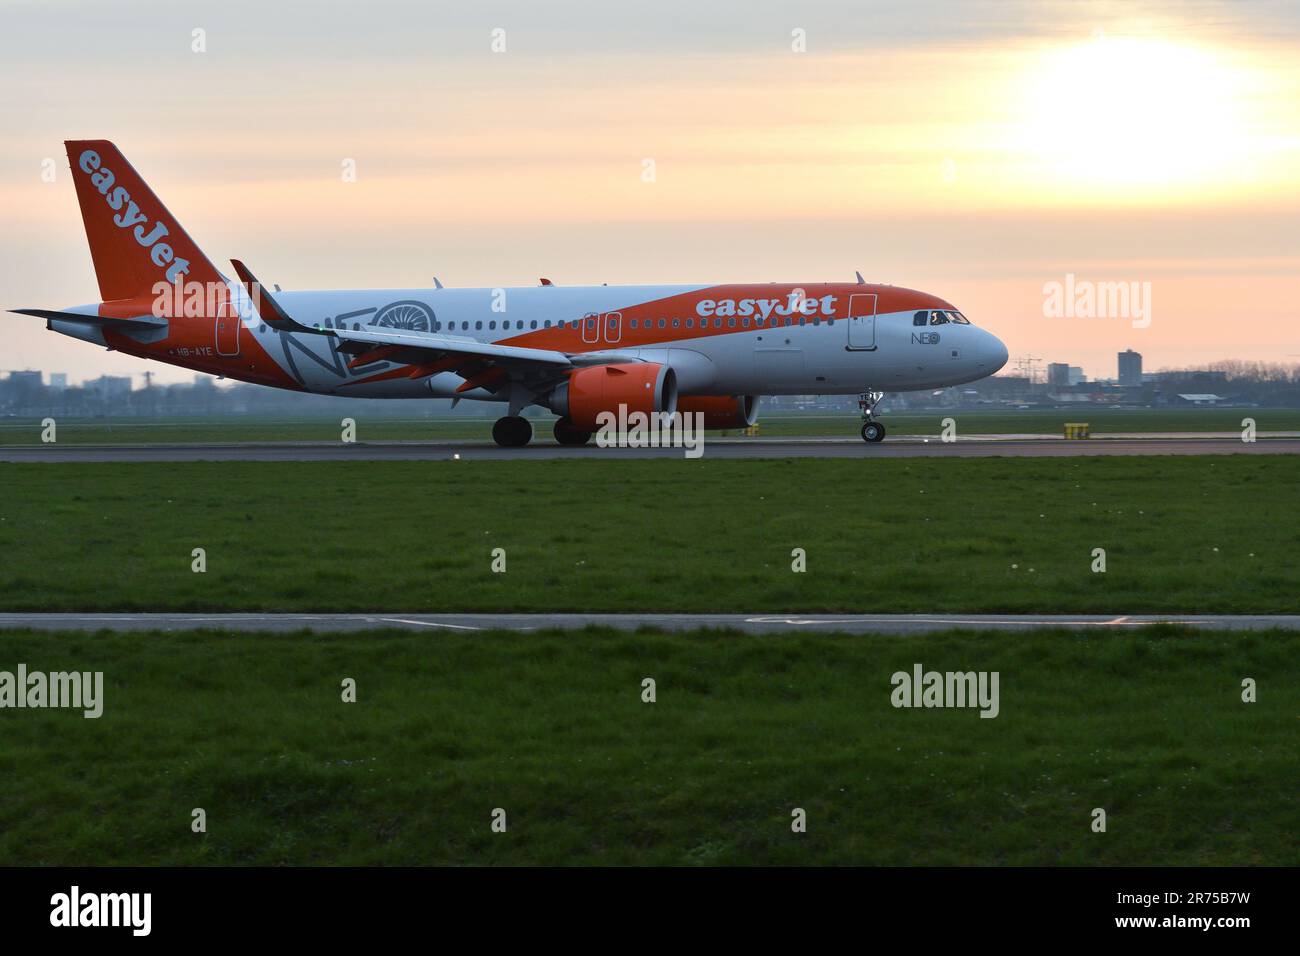 airliner on the runway, Netherlands, Schiphol Stock Photo